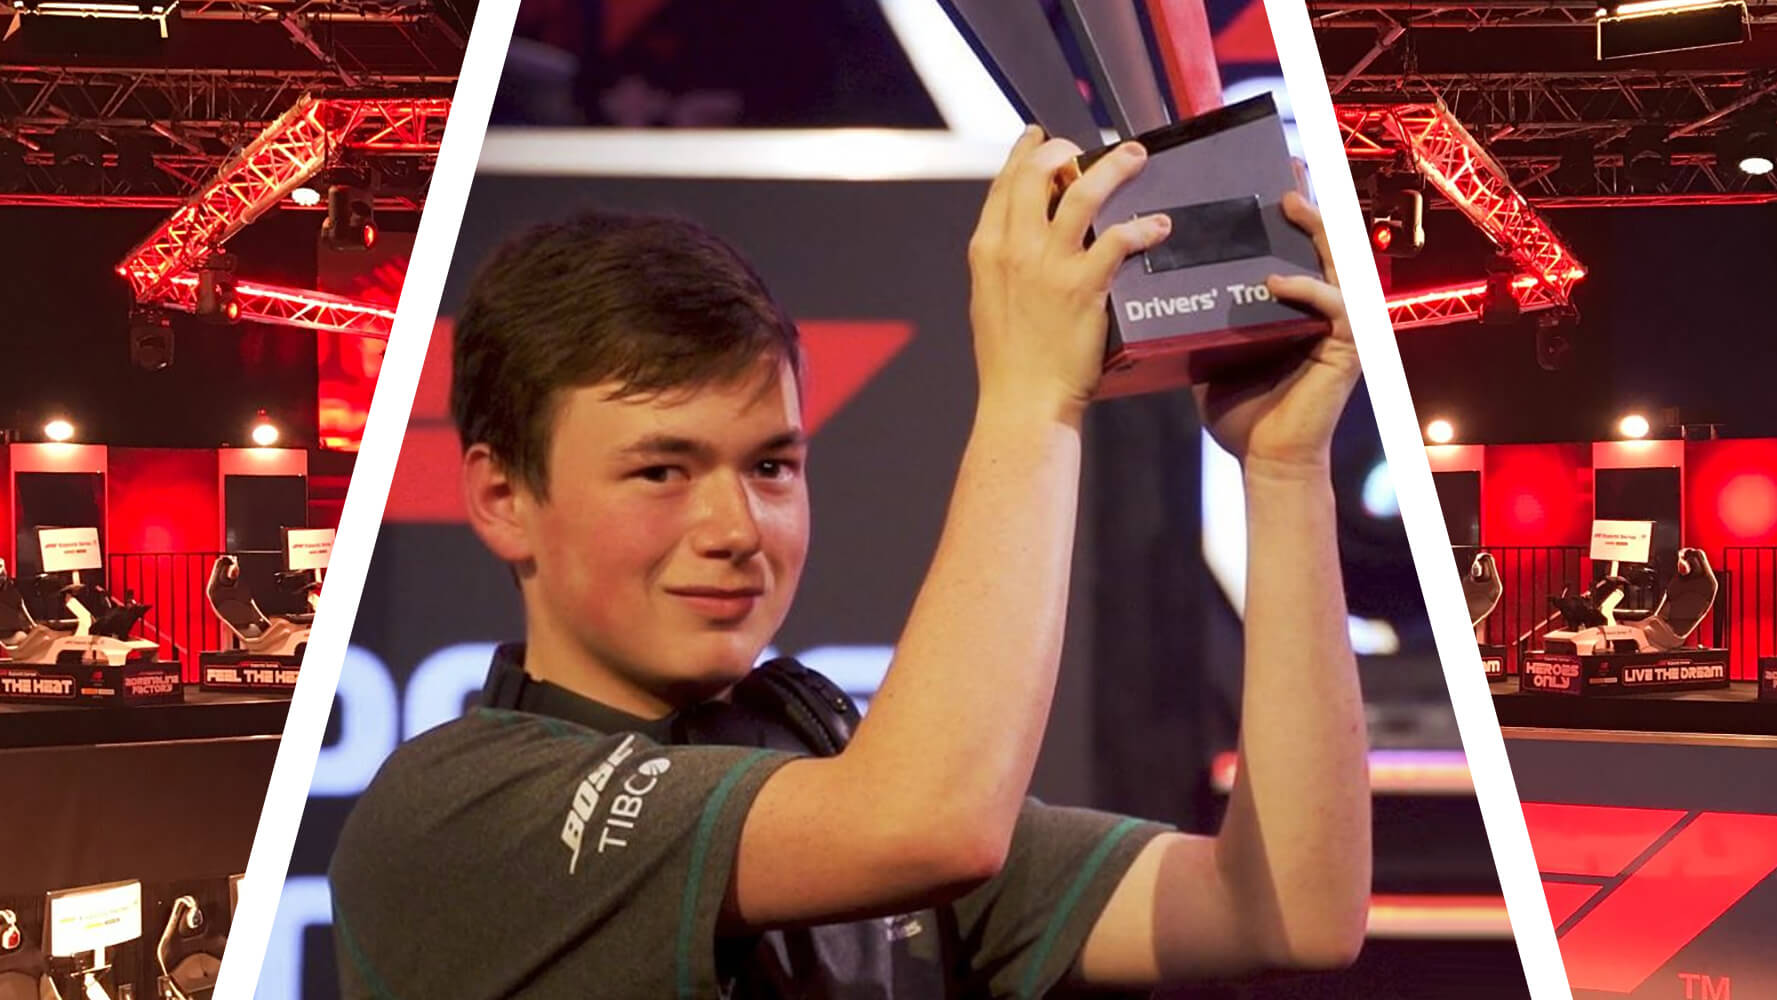 Over 5.5 Million People Watched the F1 Esports Series